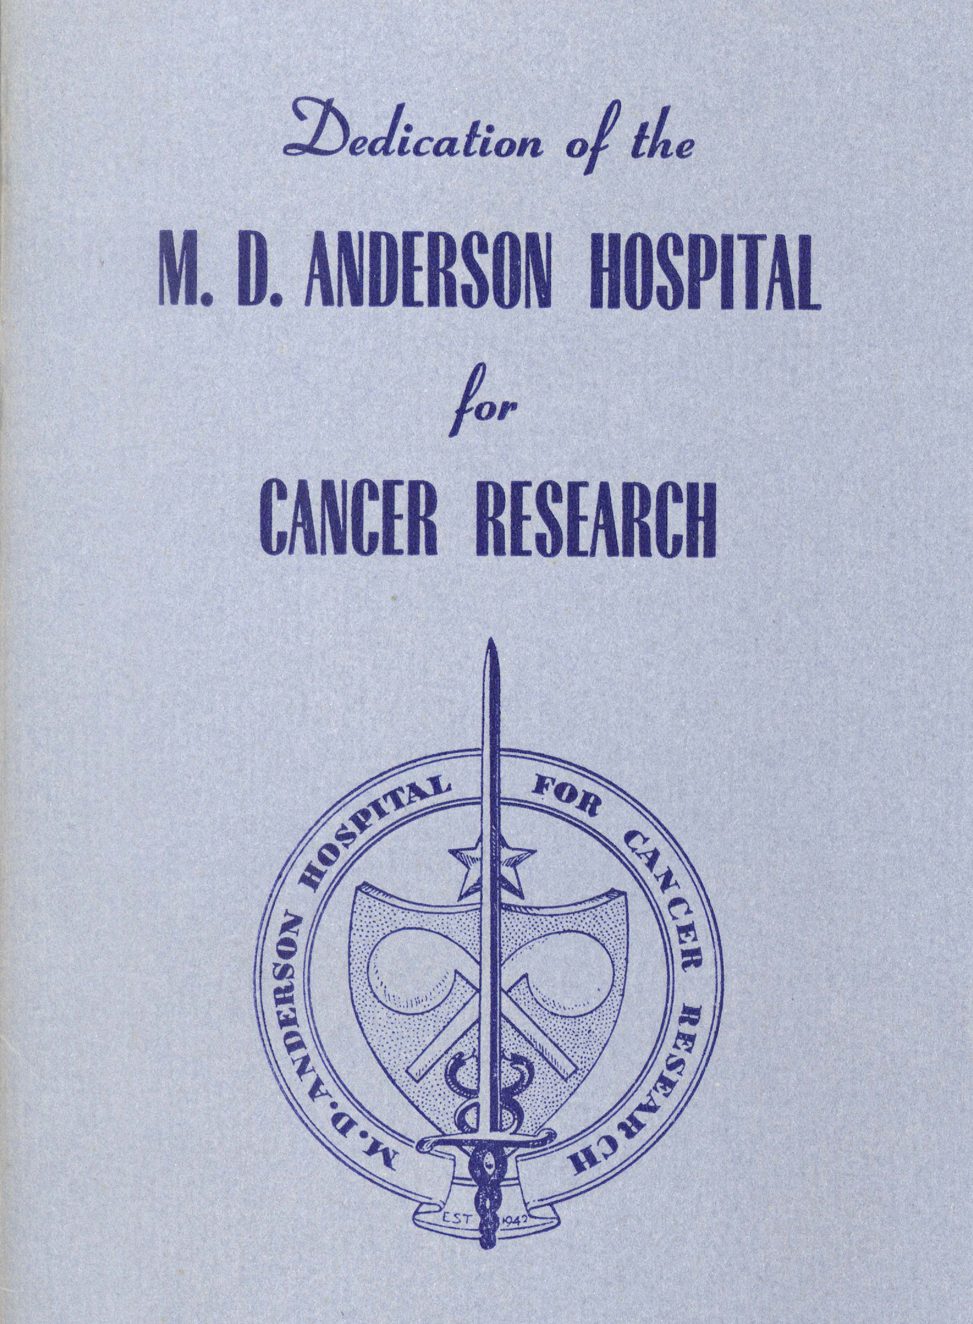 Program for the Dedication for the MD Anderson Hospital, February 17, 1944